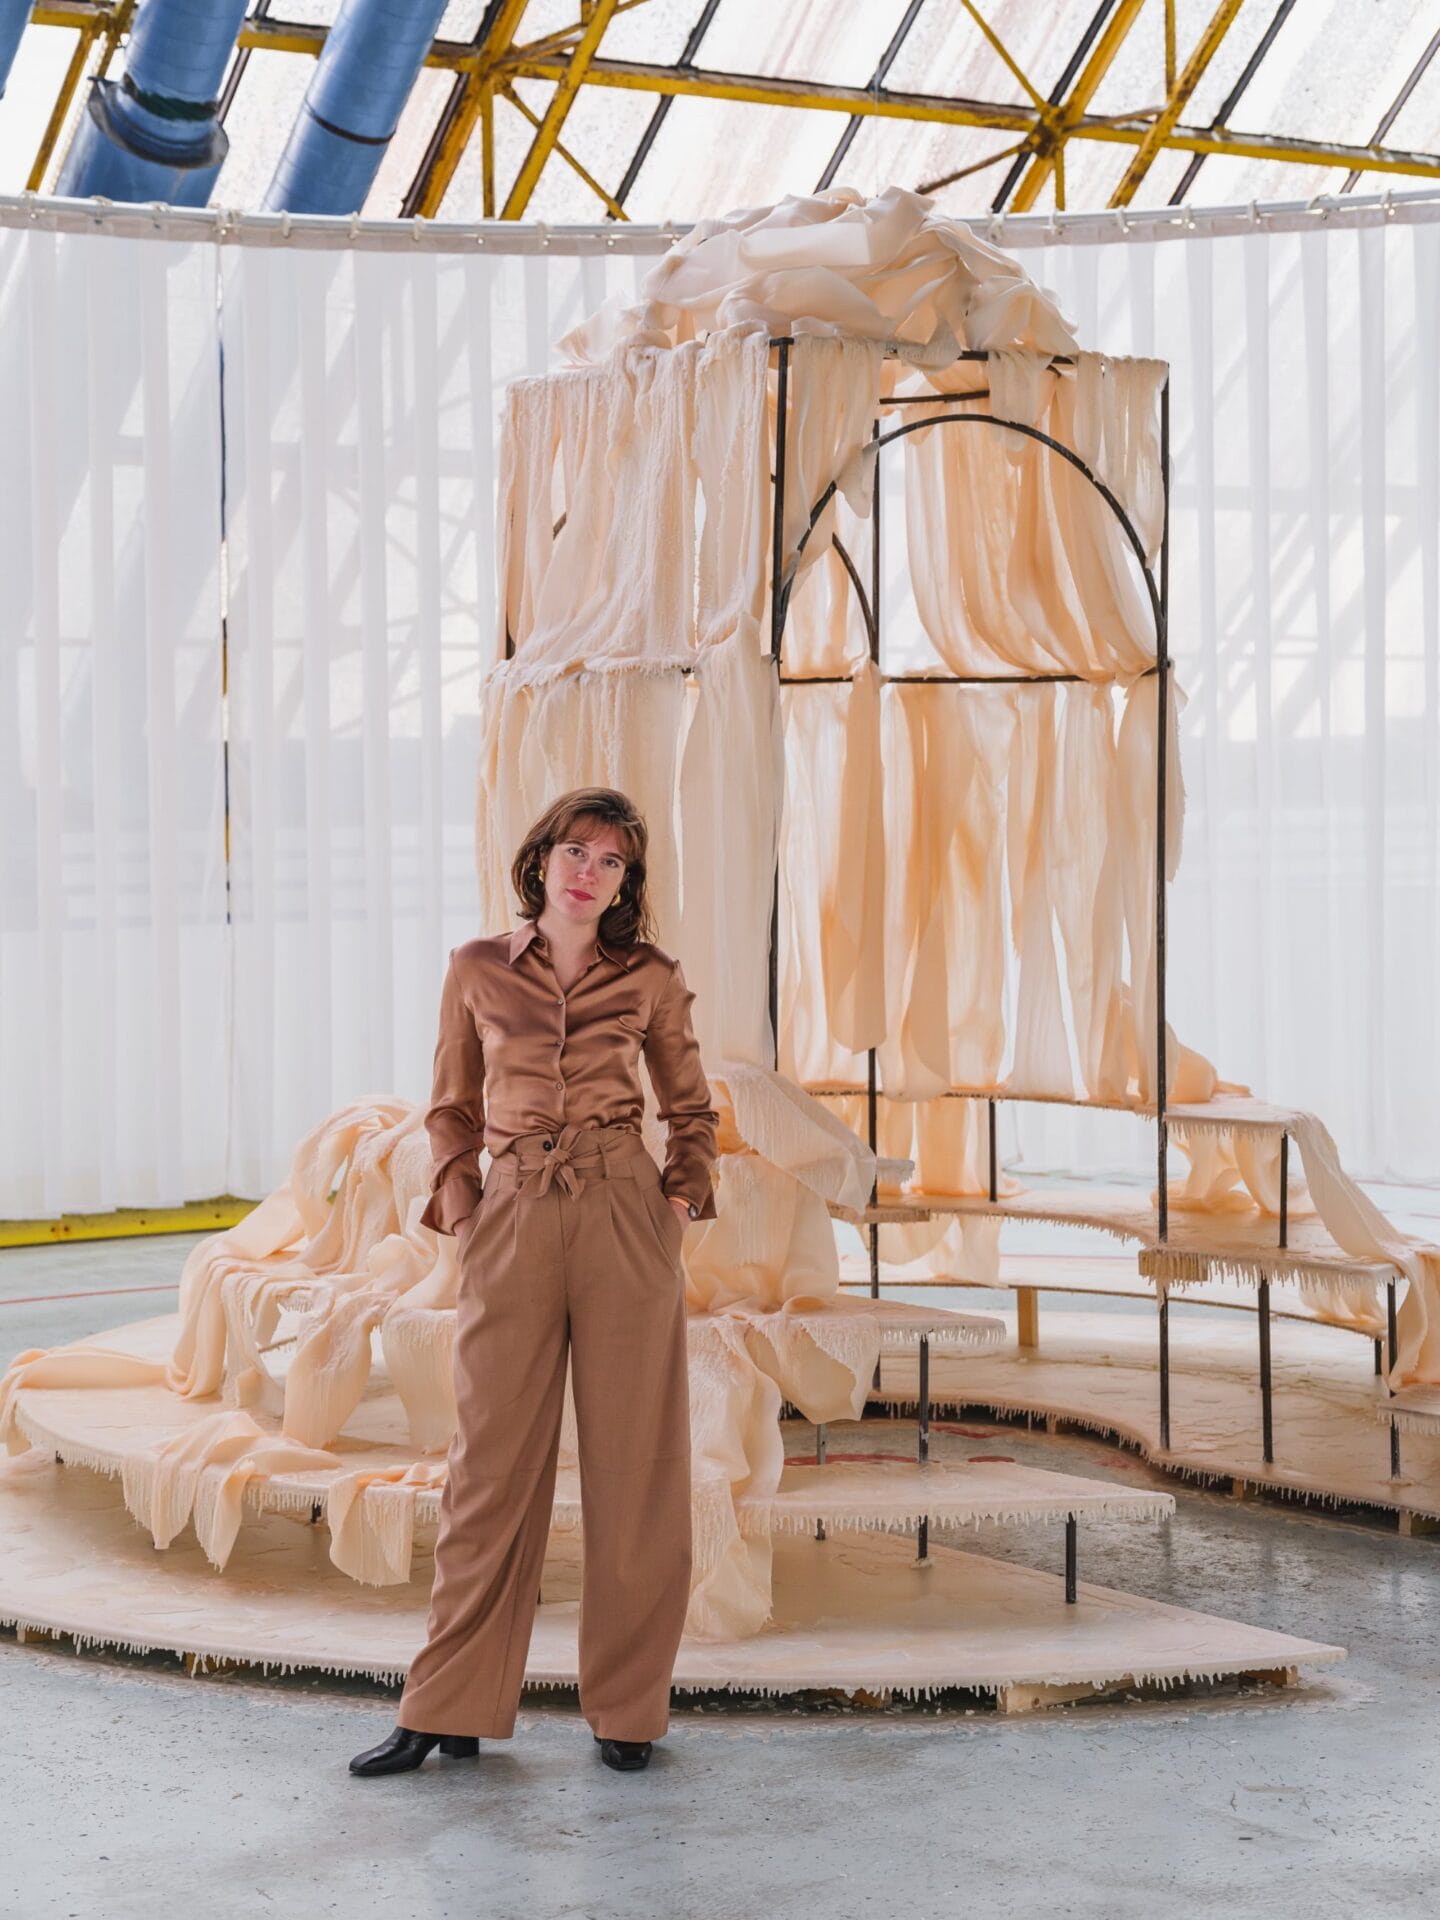 a white woman with red hair in a beige button up and pants stands in front of a tall architectural armature draped with wax sheets